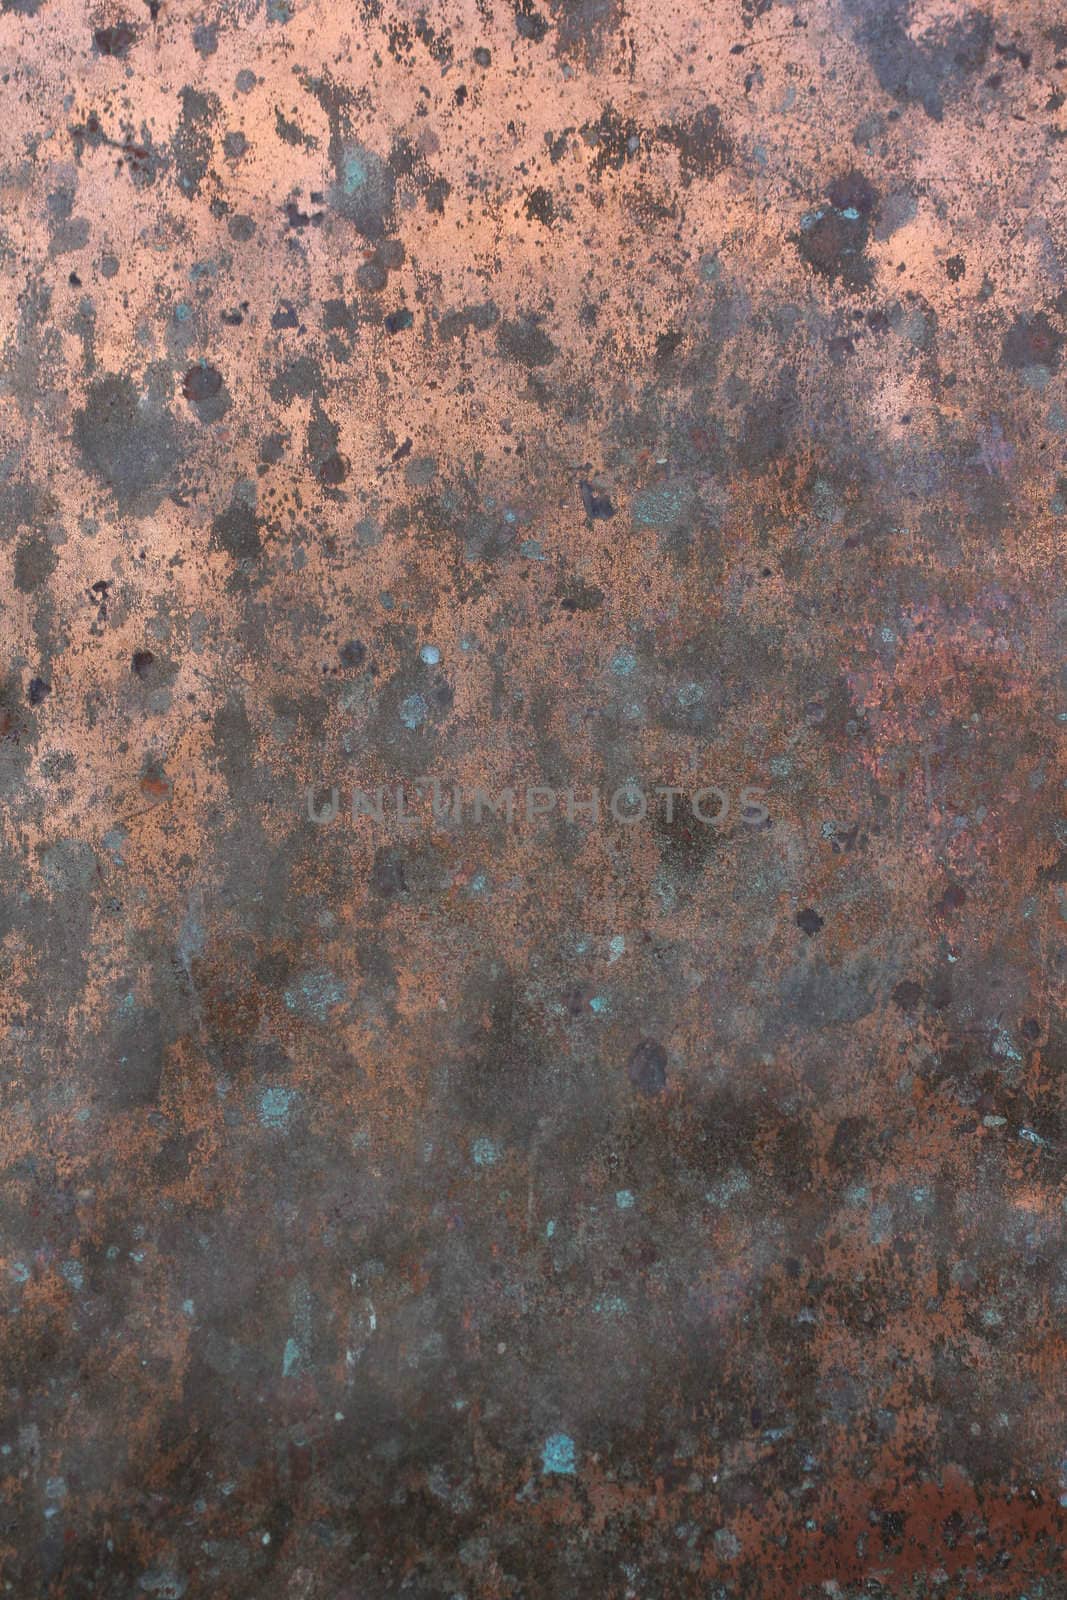 Metal grunge background or transparacy. High quality and great for any urban schene.
